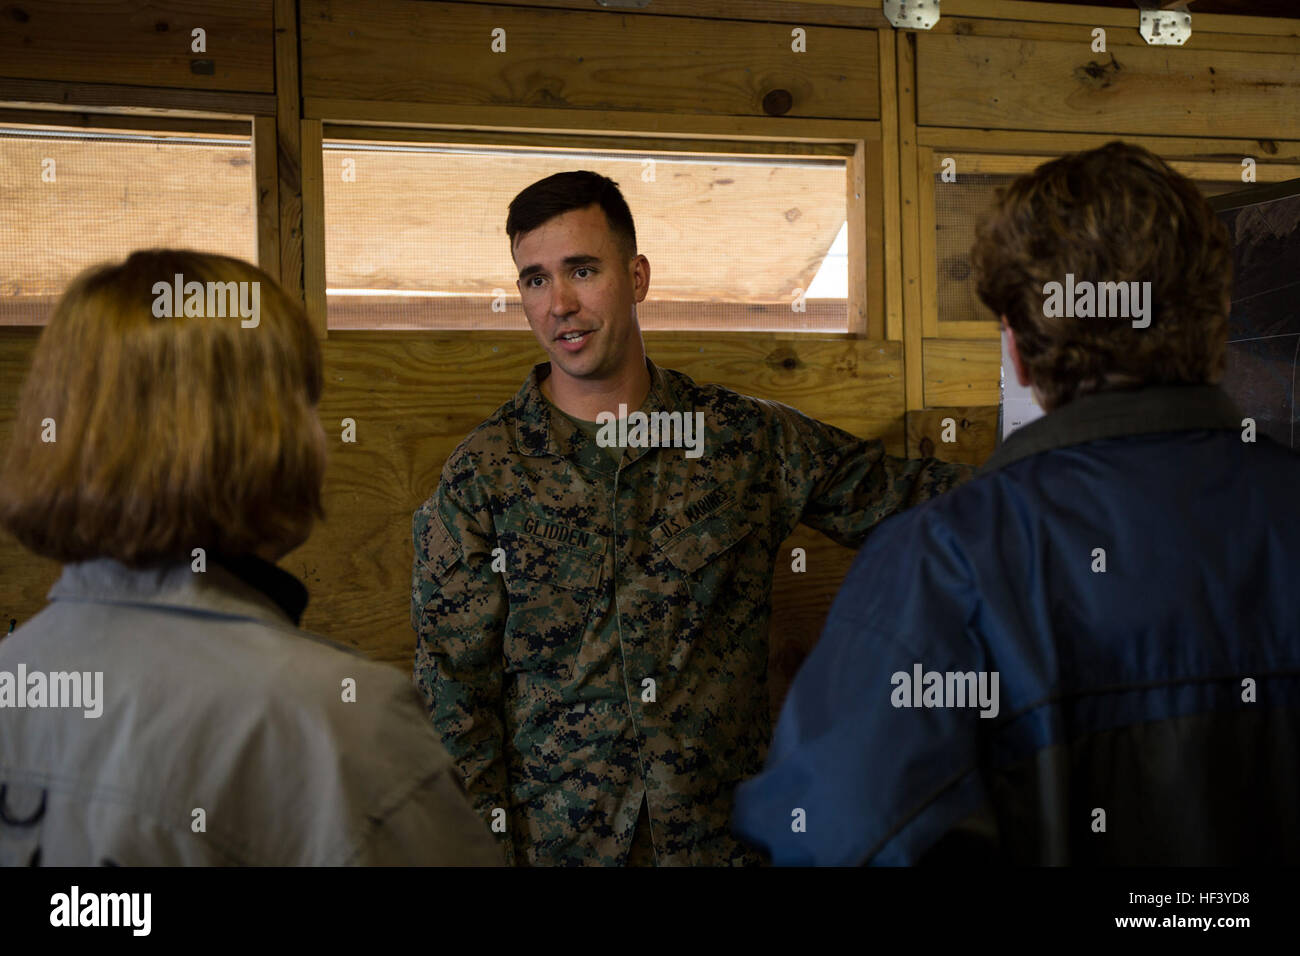 U.S. Marine Corps Staff Sgt. Nickolas Glidden, center, combat instructor, Fox Company, Marine Combat Training Battalion, School of Infantry-East, briefs  members from the Defense Advisory Committee on Women in the Services (DACOWITS) during a command visit at Camp Geiger, North Carolina, May 4, 2016. The purpose of the DACOWITS is to provide advice and recommendations on matters and policies relating to the recruitment, retention, treatment, employment, integration, and well being of highly qualified professional women in the Armed Forces. (U.S. Marine Corps Photo By Sgt. Katelyn Hunter, SOI-E Stock Photo